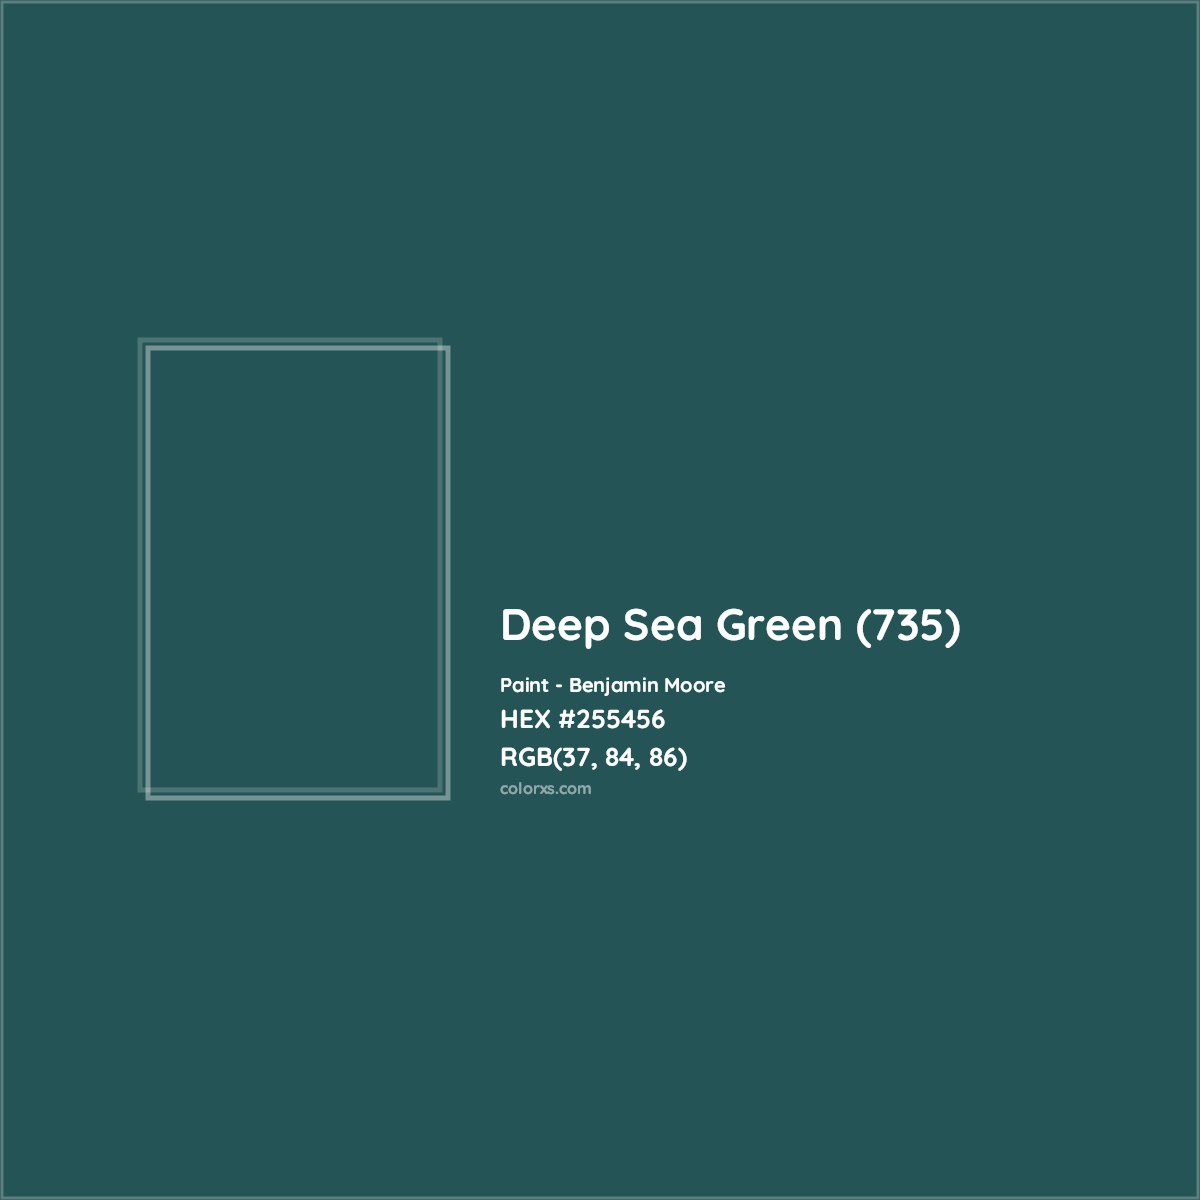 Deep Sea Green 735 Complementary Or Opposite Color Name And Code